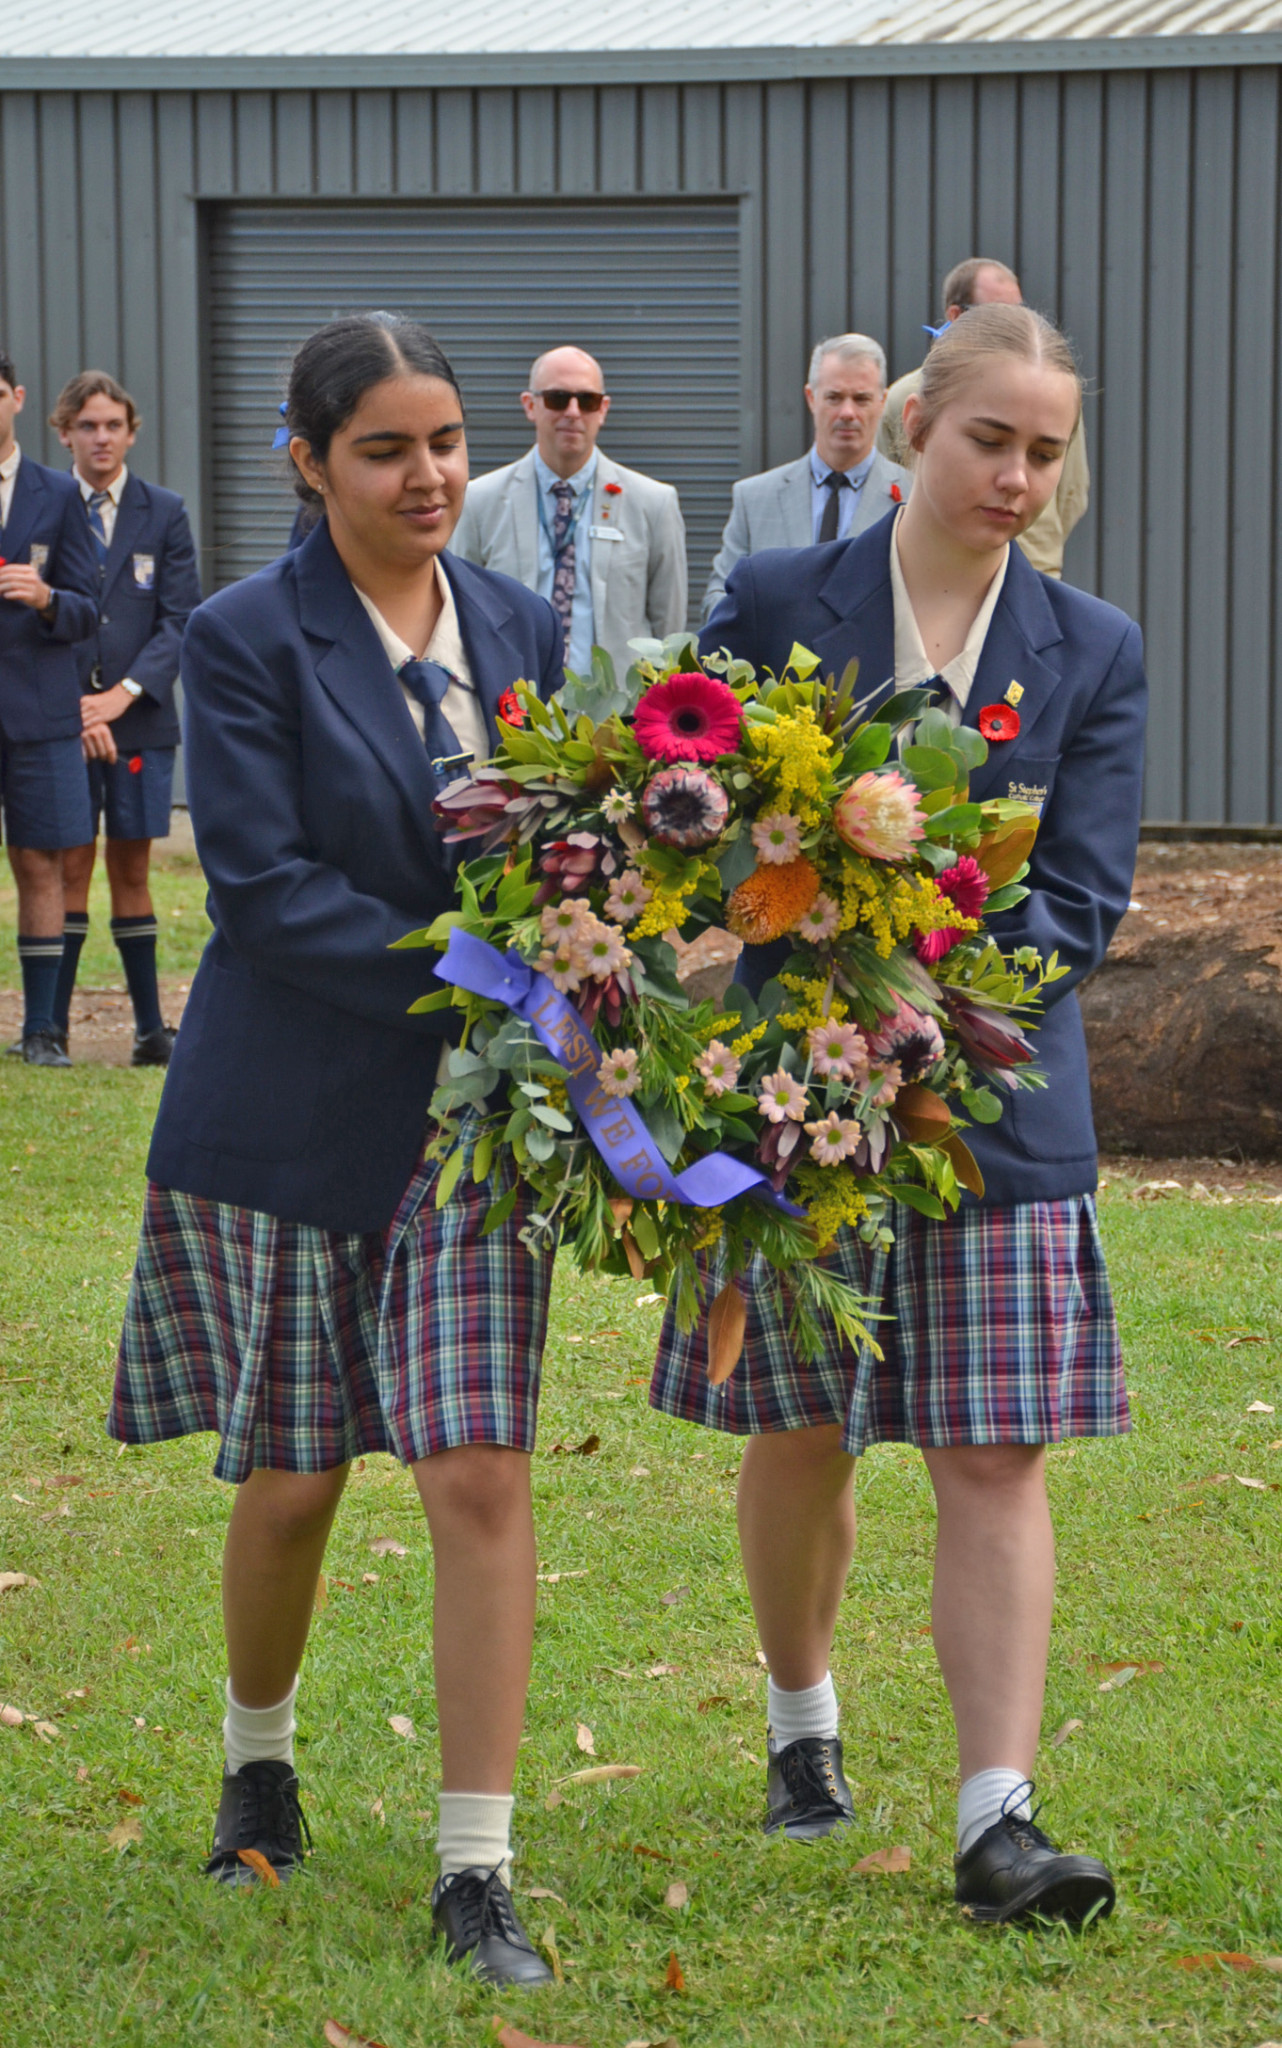 St Stephen’s Catholic College captains Manvir Kaur and Ella Daven laying the wreath.